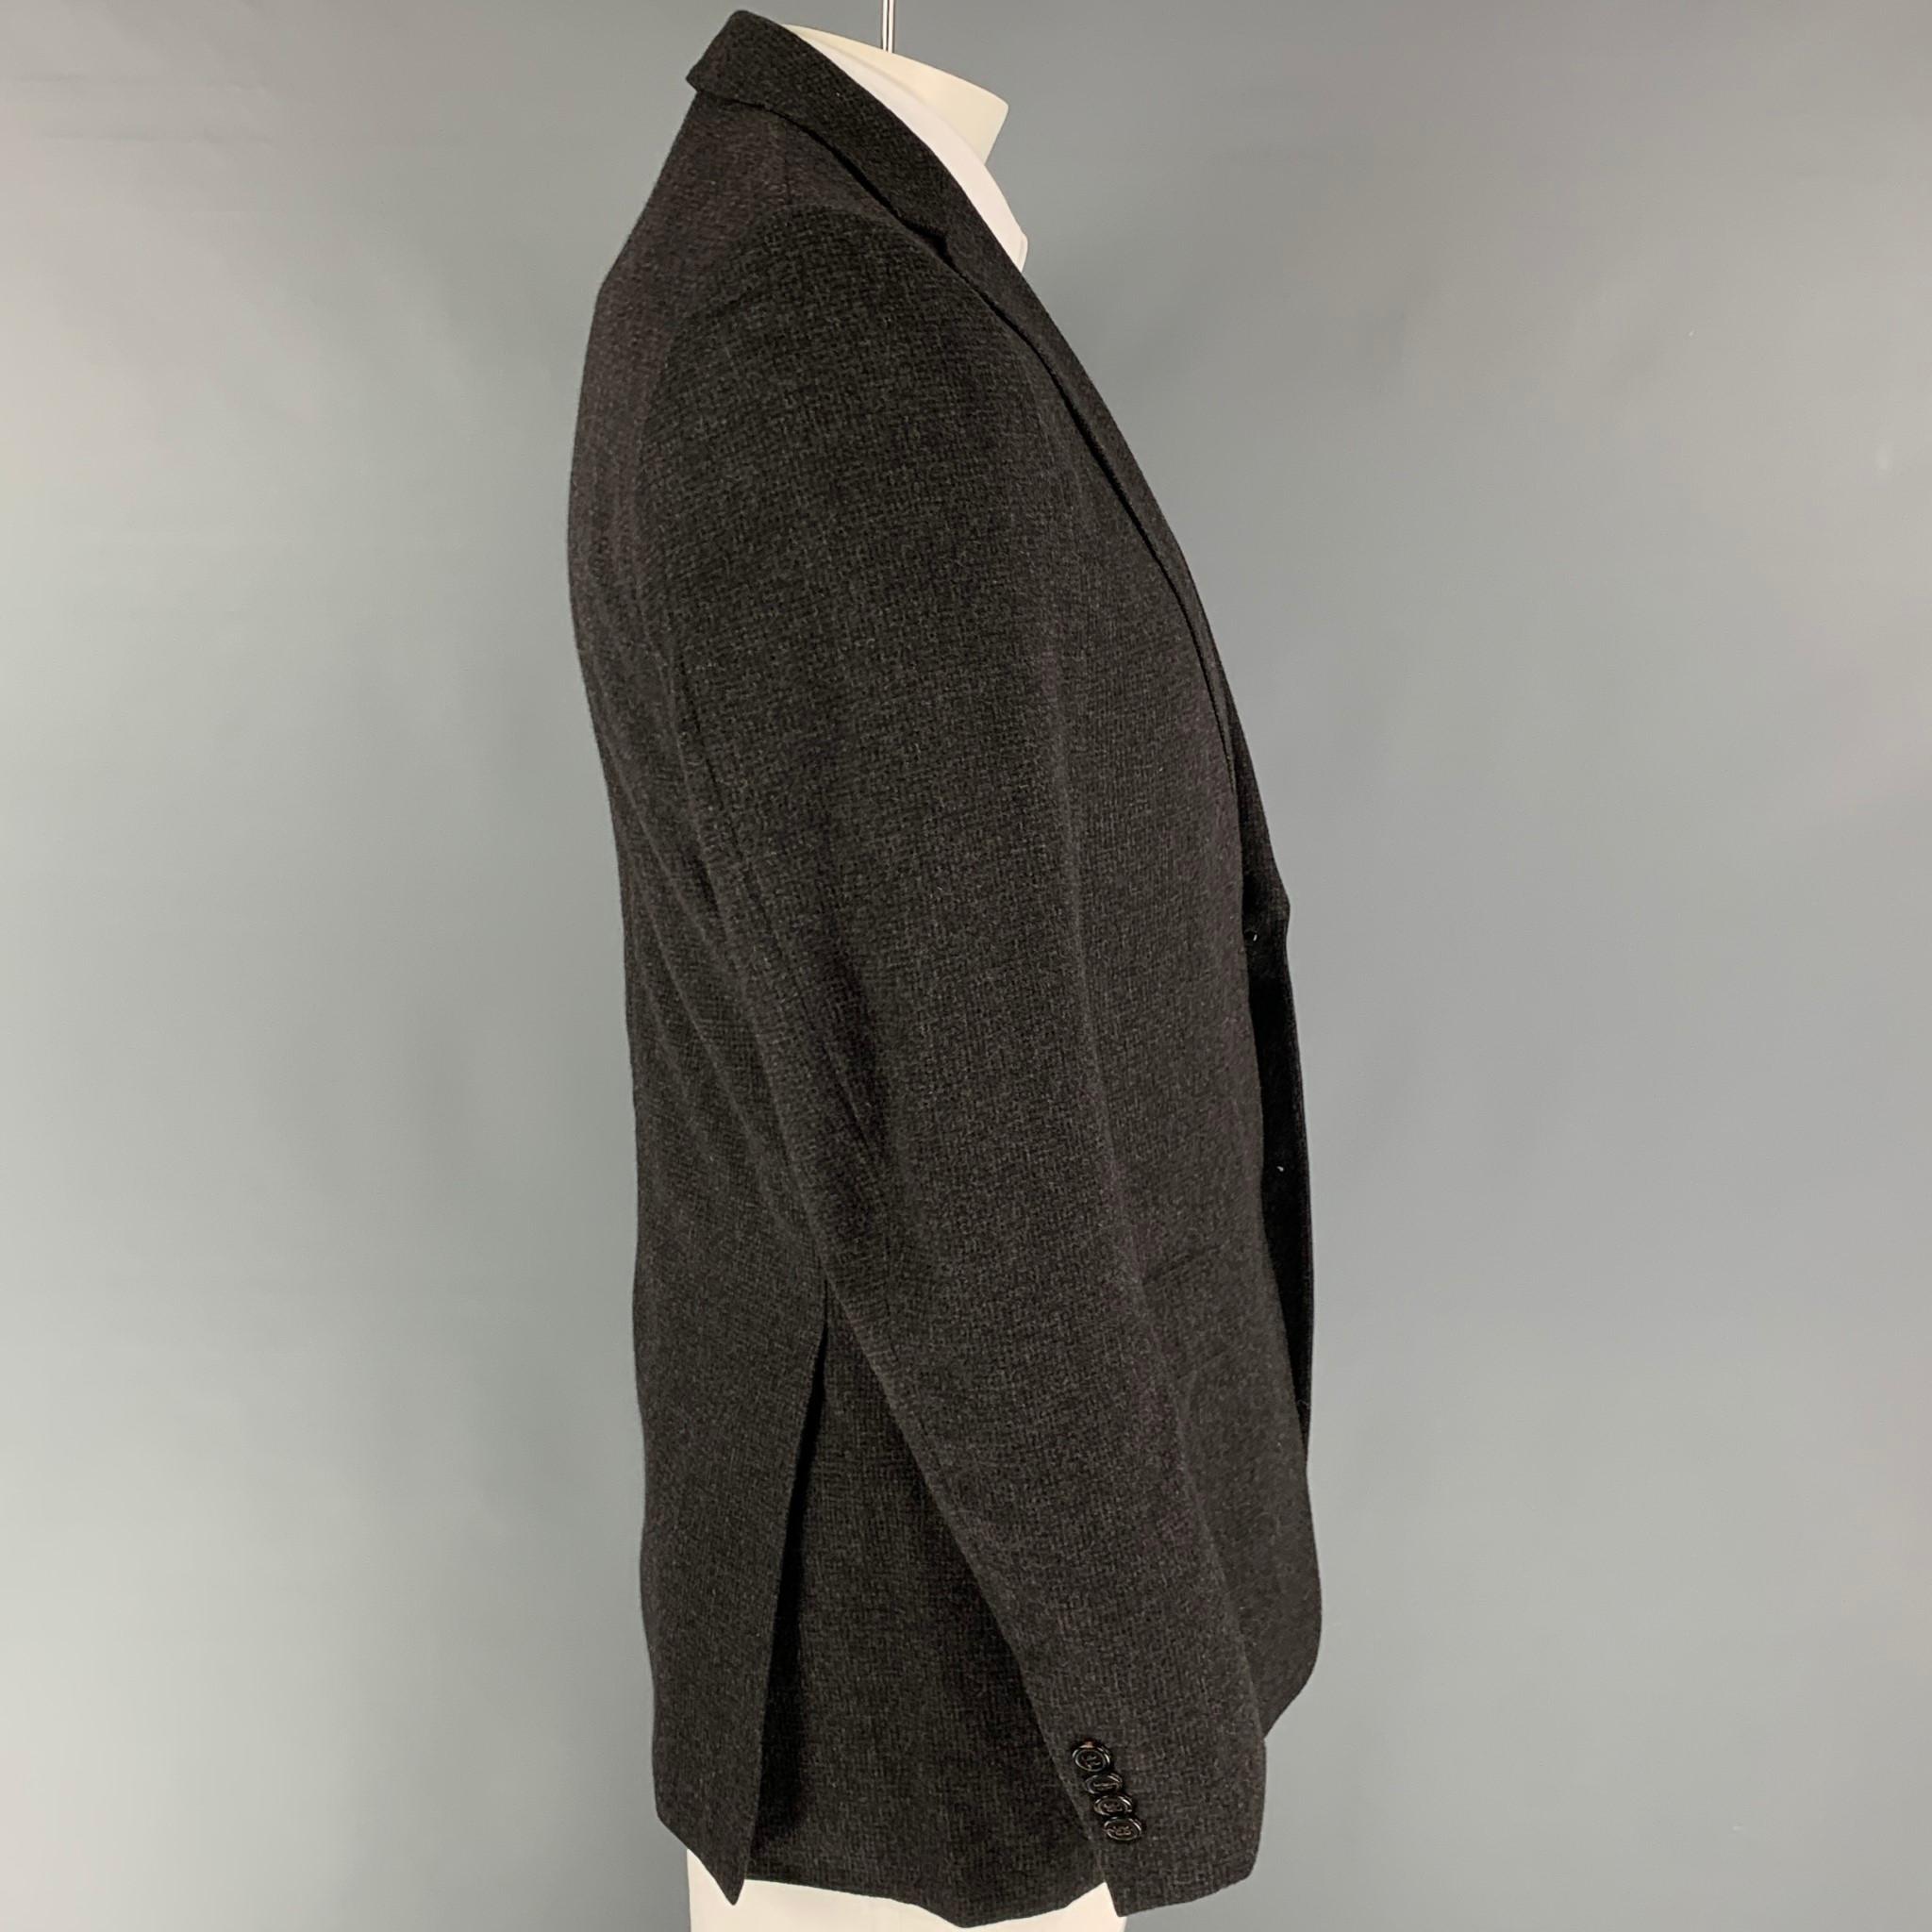 Z ZEGNA sport coat comes in a charcoal & grey grid wool / angora with a full liner featuring a notch lapel, flap pockets, double back vent, and a double button closure. 

Very Good Pre-Owned Condition. Missing one button.
Marked: 50